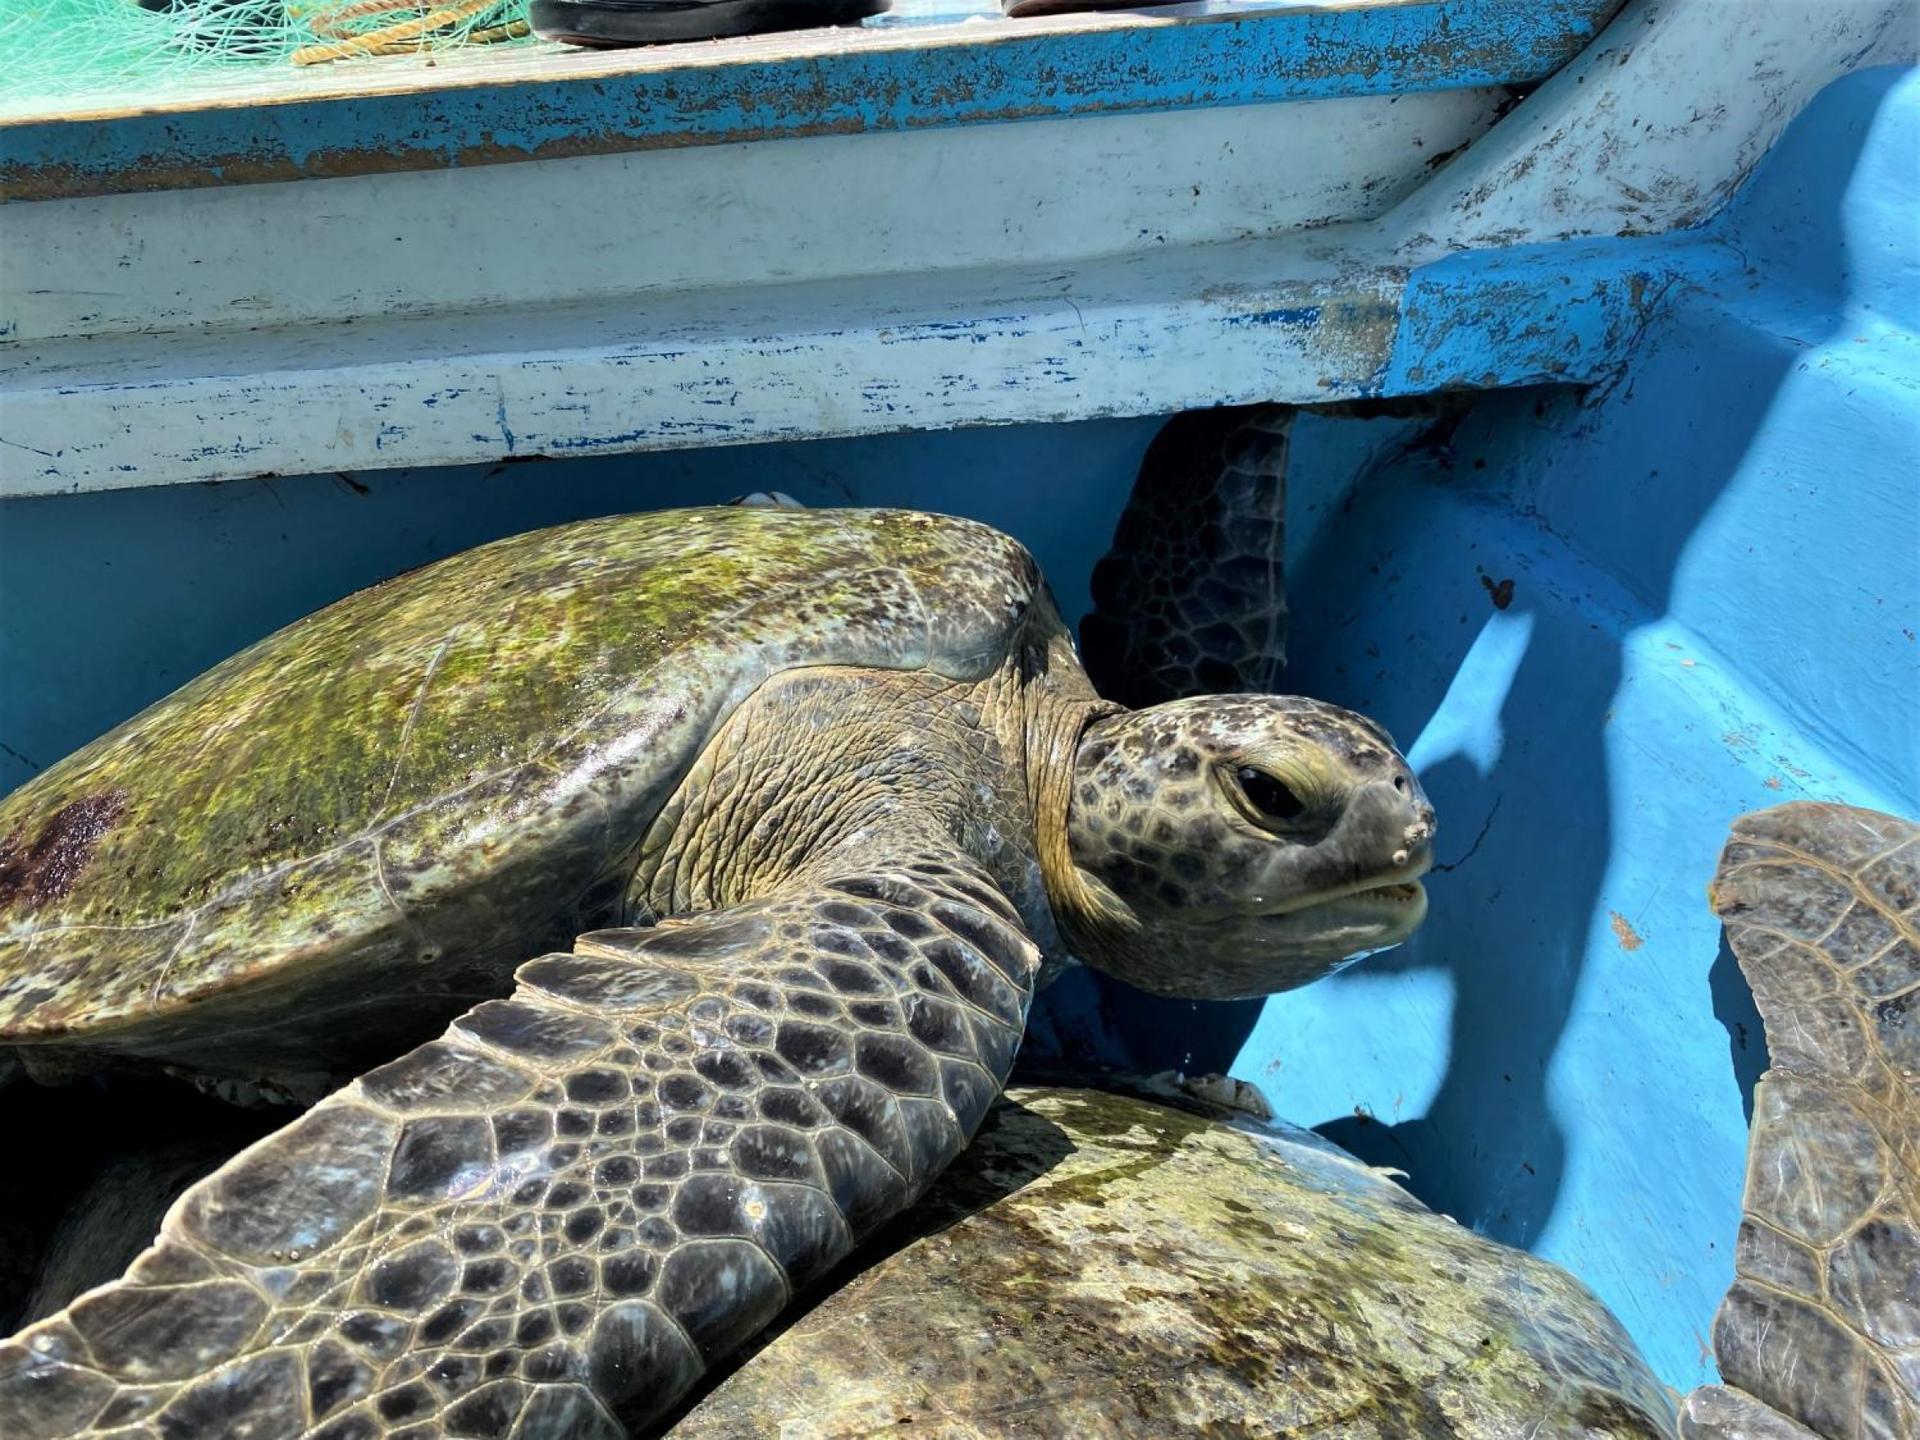 The sea turtles jostled in the bottom of the boat as volunteers brought them back to the shore.